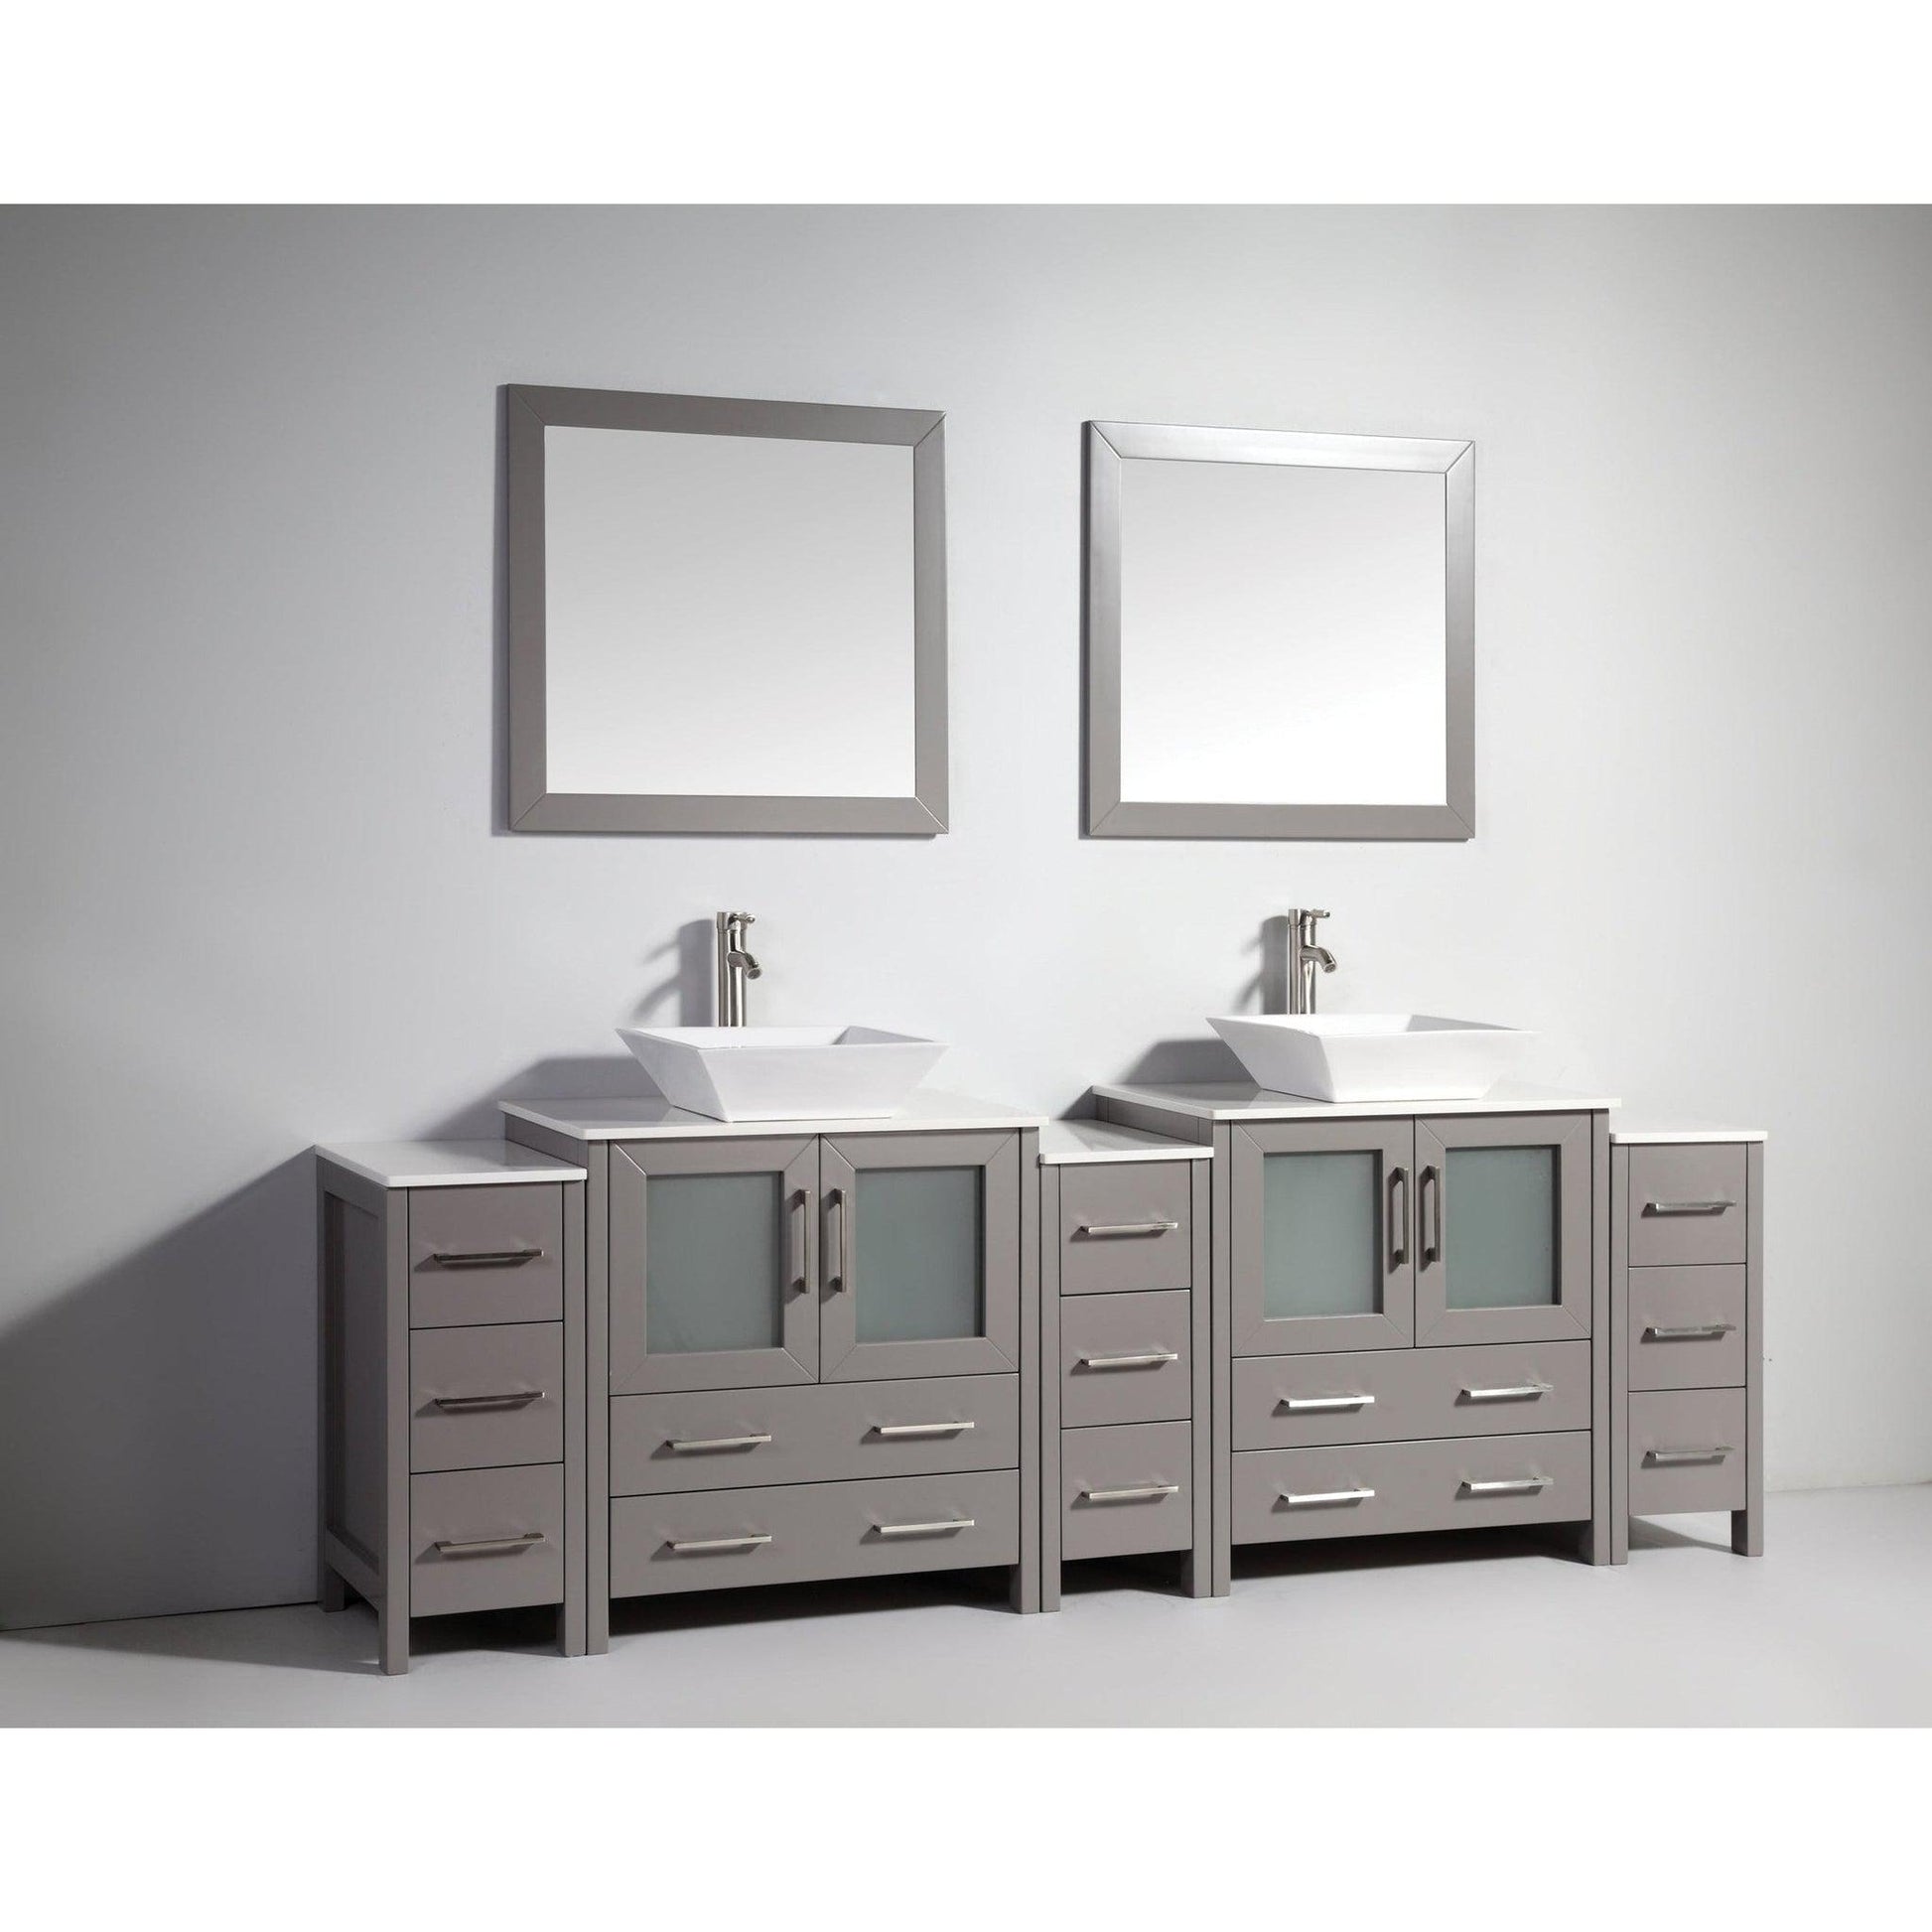 Vanity Art Ravenna 96" Double Gray Freestanding Vanity Set With White Engineered Marble Top, 2 Ceramic Vessel Sinks, 3 Side Cabinets and 2 Mirrors